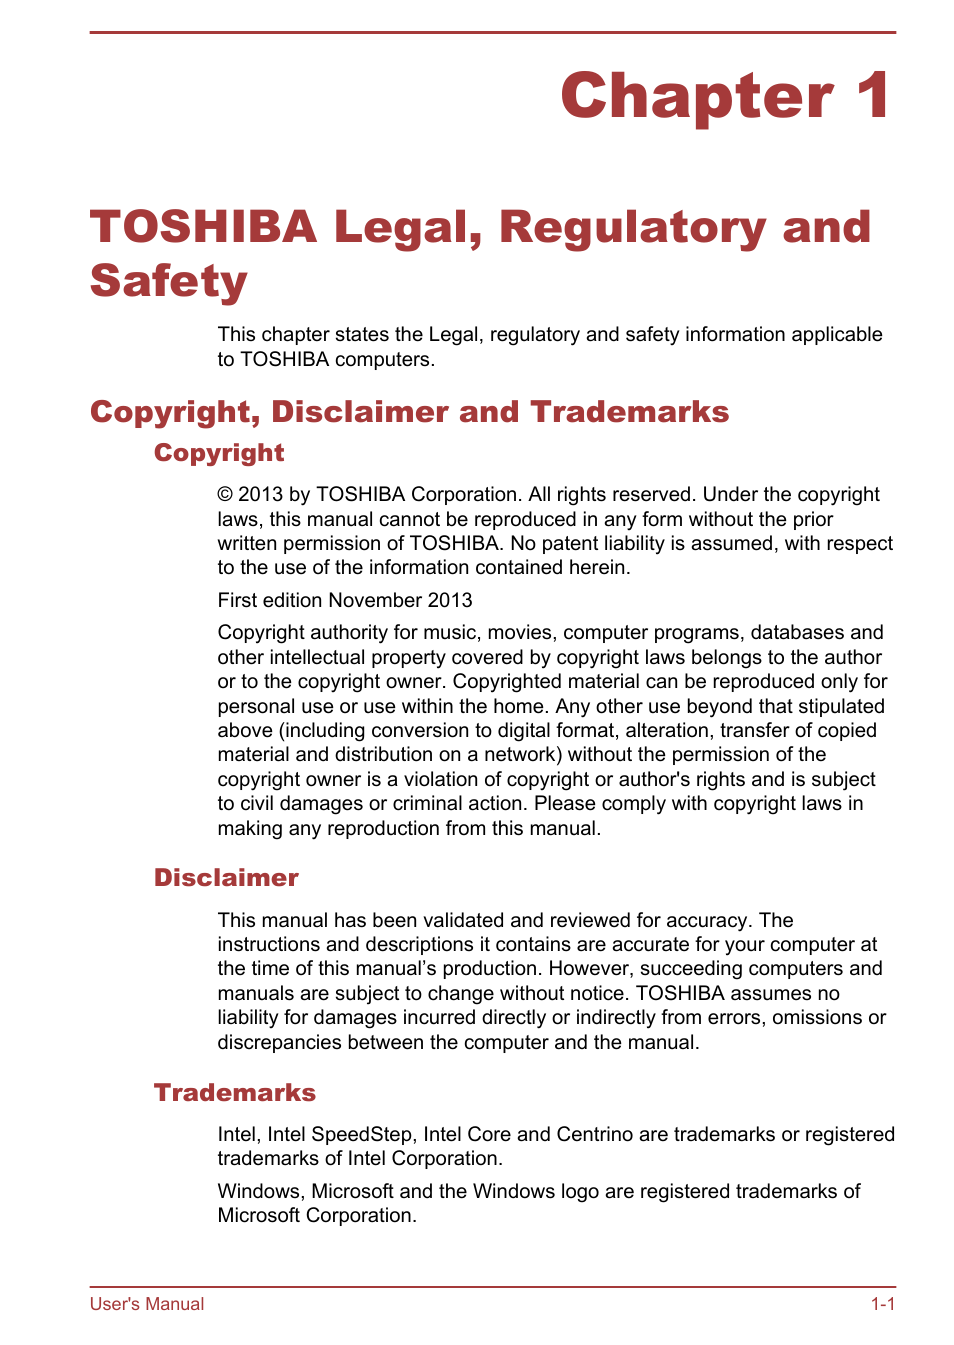 Chapter 1 toshiba legal, regulatory and safety, Copyright, disclaimer and trademarks, Copyright | Disclaimer, Trademarks, Chapter 1, Toshiba legal, regulatory and safety, Copyright, disclaimer and trademarks -1 | Toshiba KIRA User Manual | Page 4 / 107